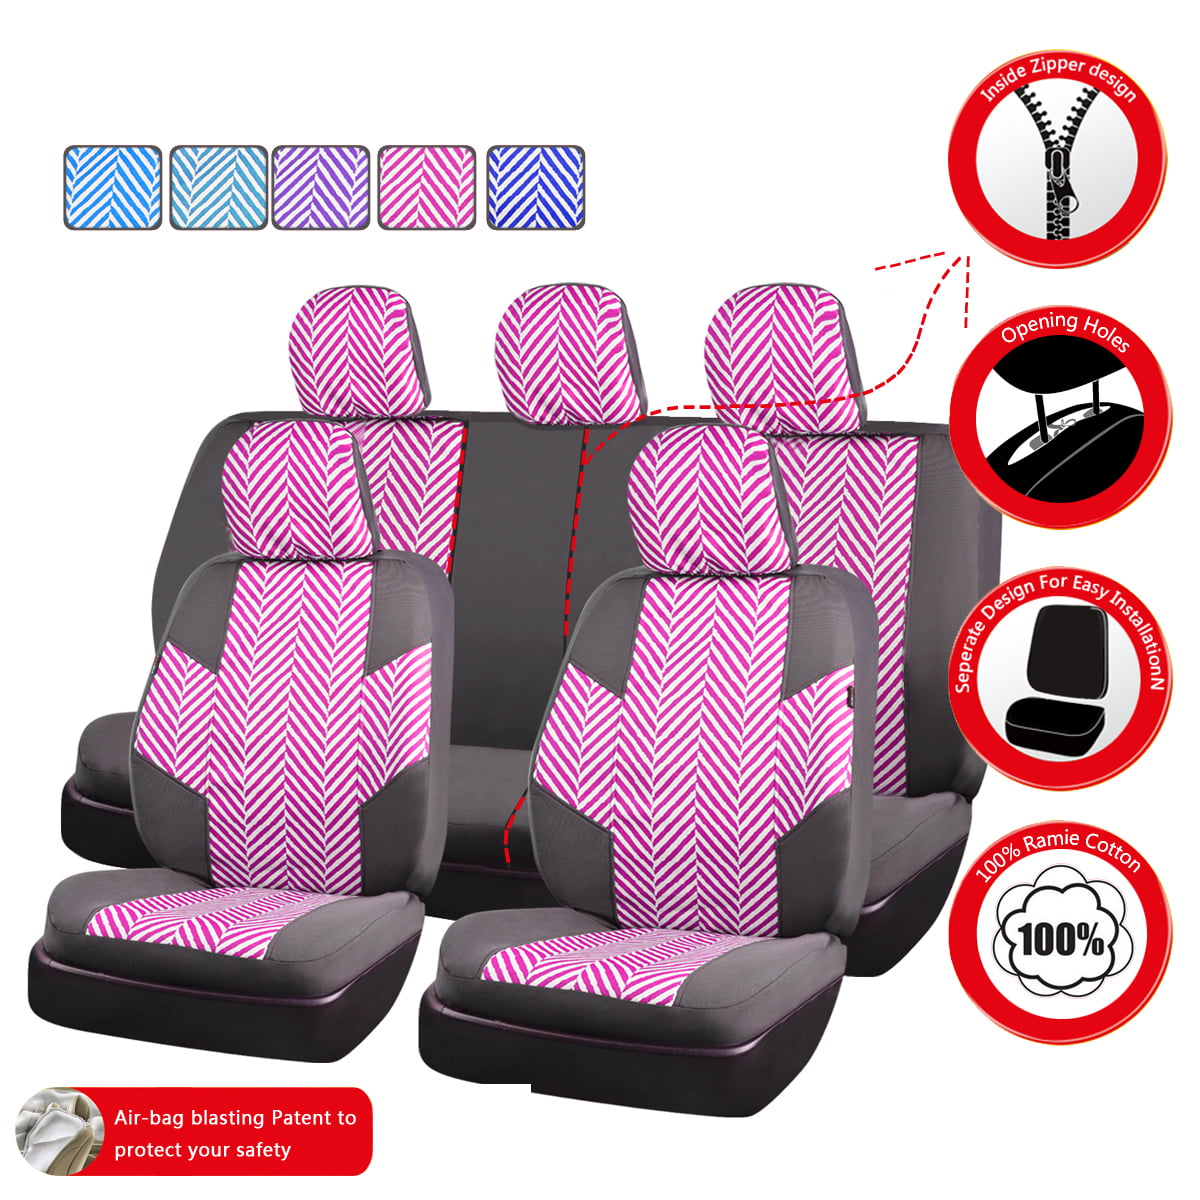 CAR PASS HOMESTYLE Linen Universal Fit Car Seat Covers with Opening Holes,Universal fit for Suvs,Cars,Trucks,Sedans,Vans,Airbag Compatible Black with Pink